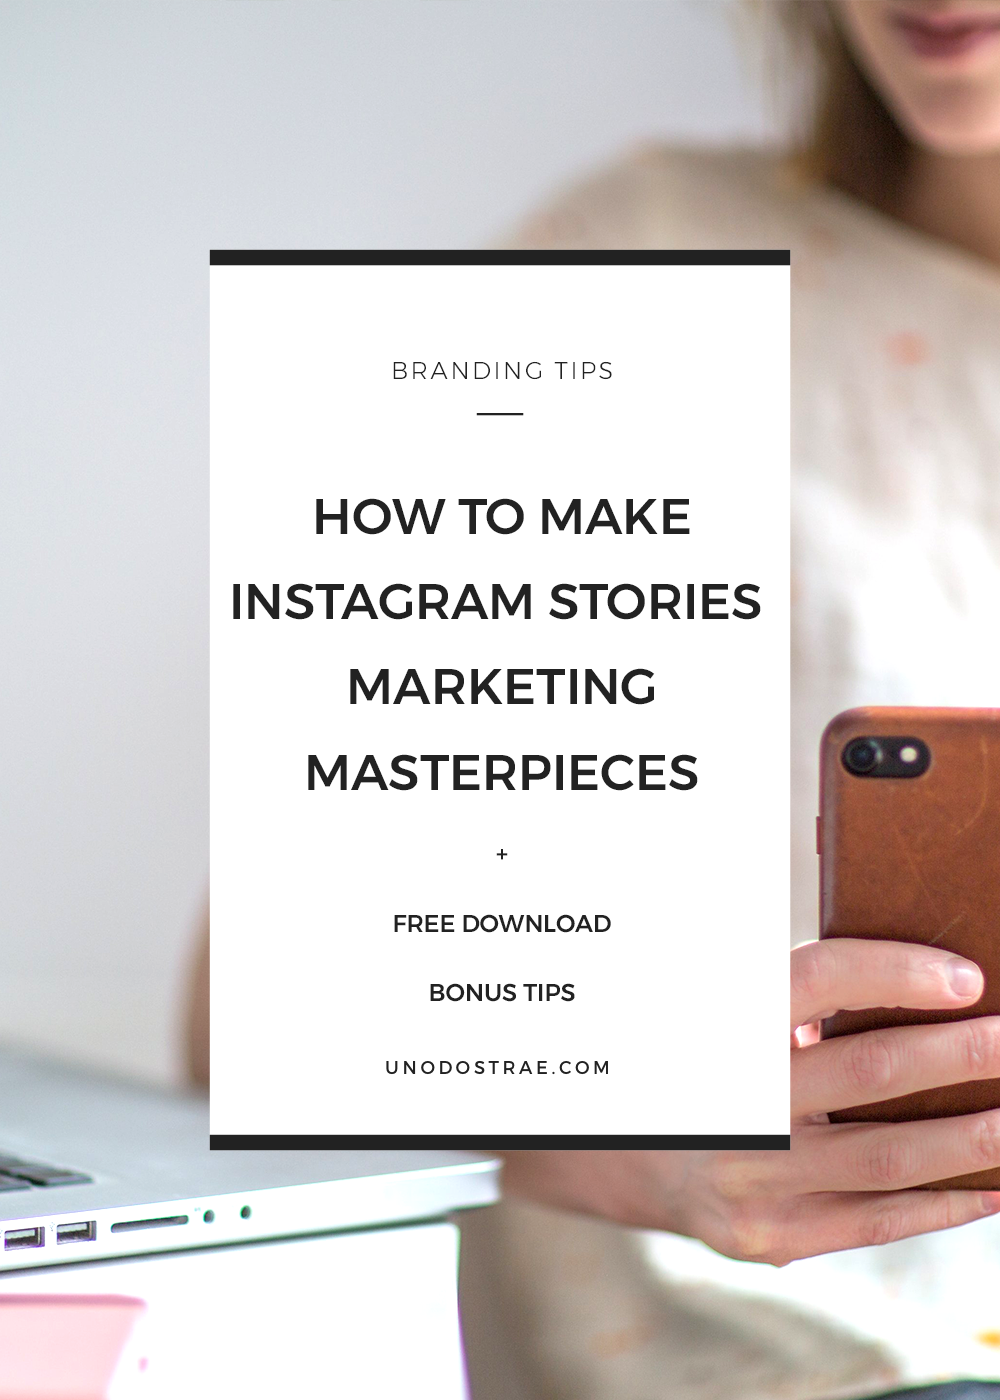 How To Make Instagram Stories Marketing Masterpieces In 9 Easy Steps ...